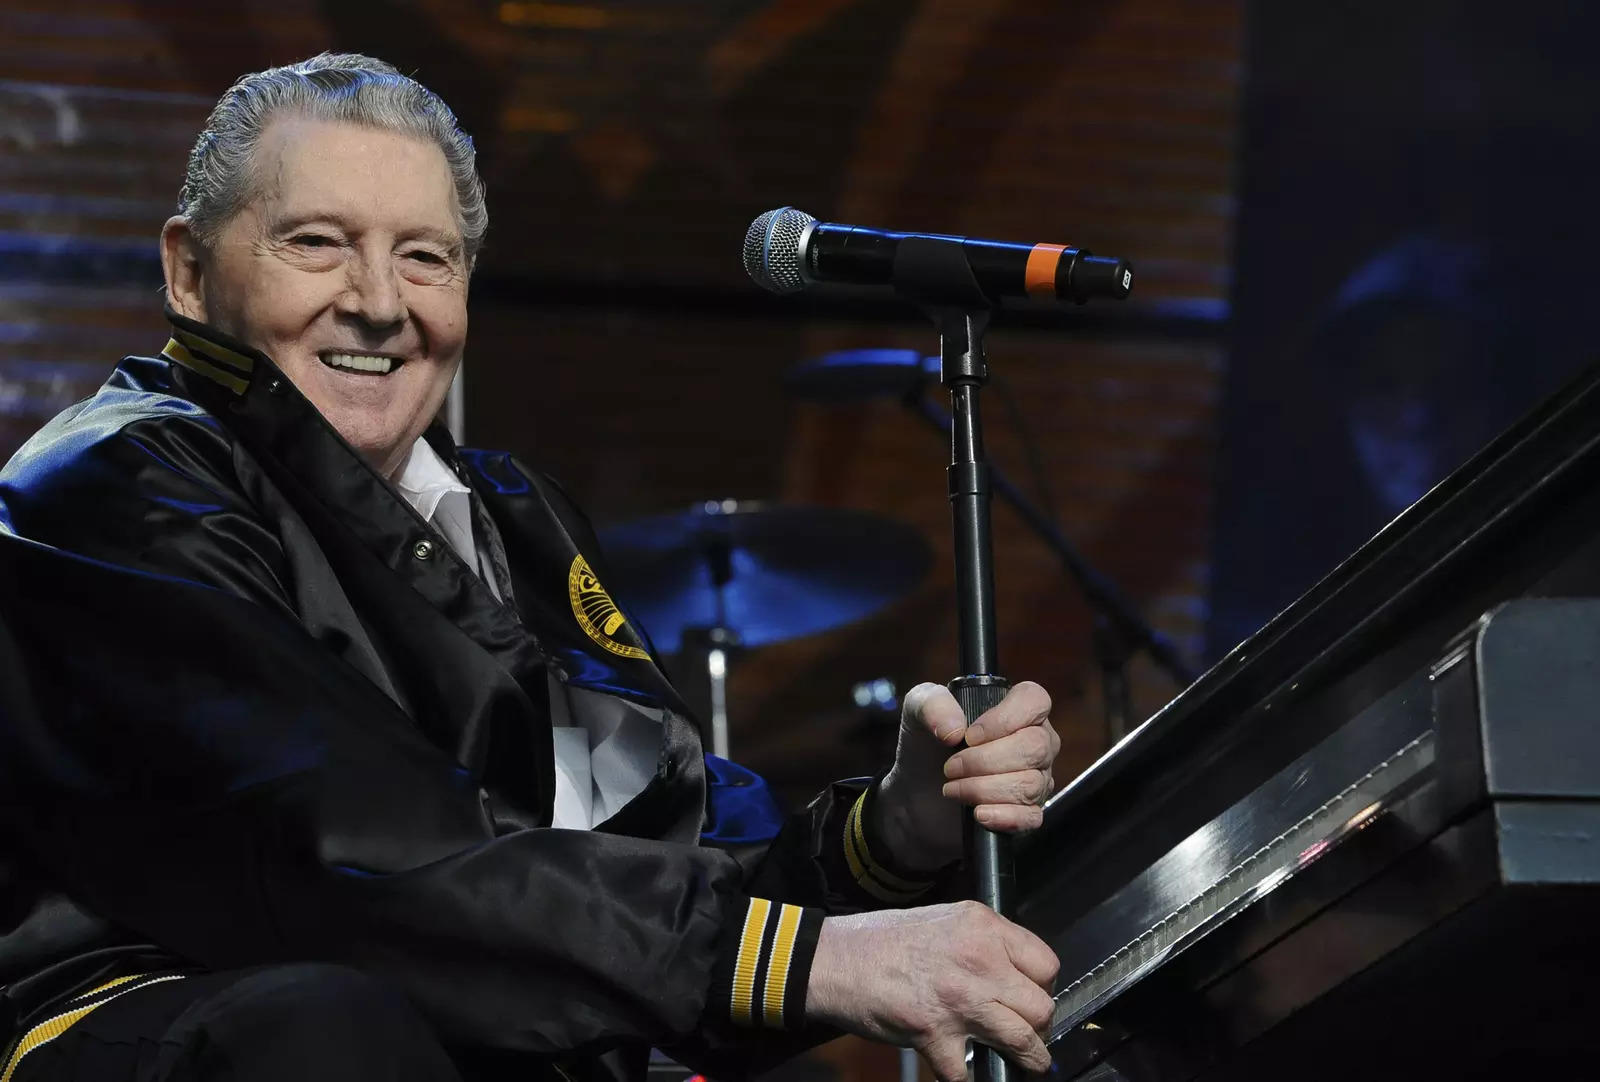 Rock 'n' roll star Jerry Lee Lewis, 'Great Balls of Fire' singer known for outrageous style, personal life, dies at 87